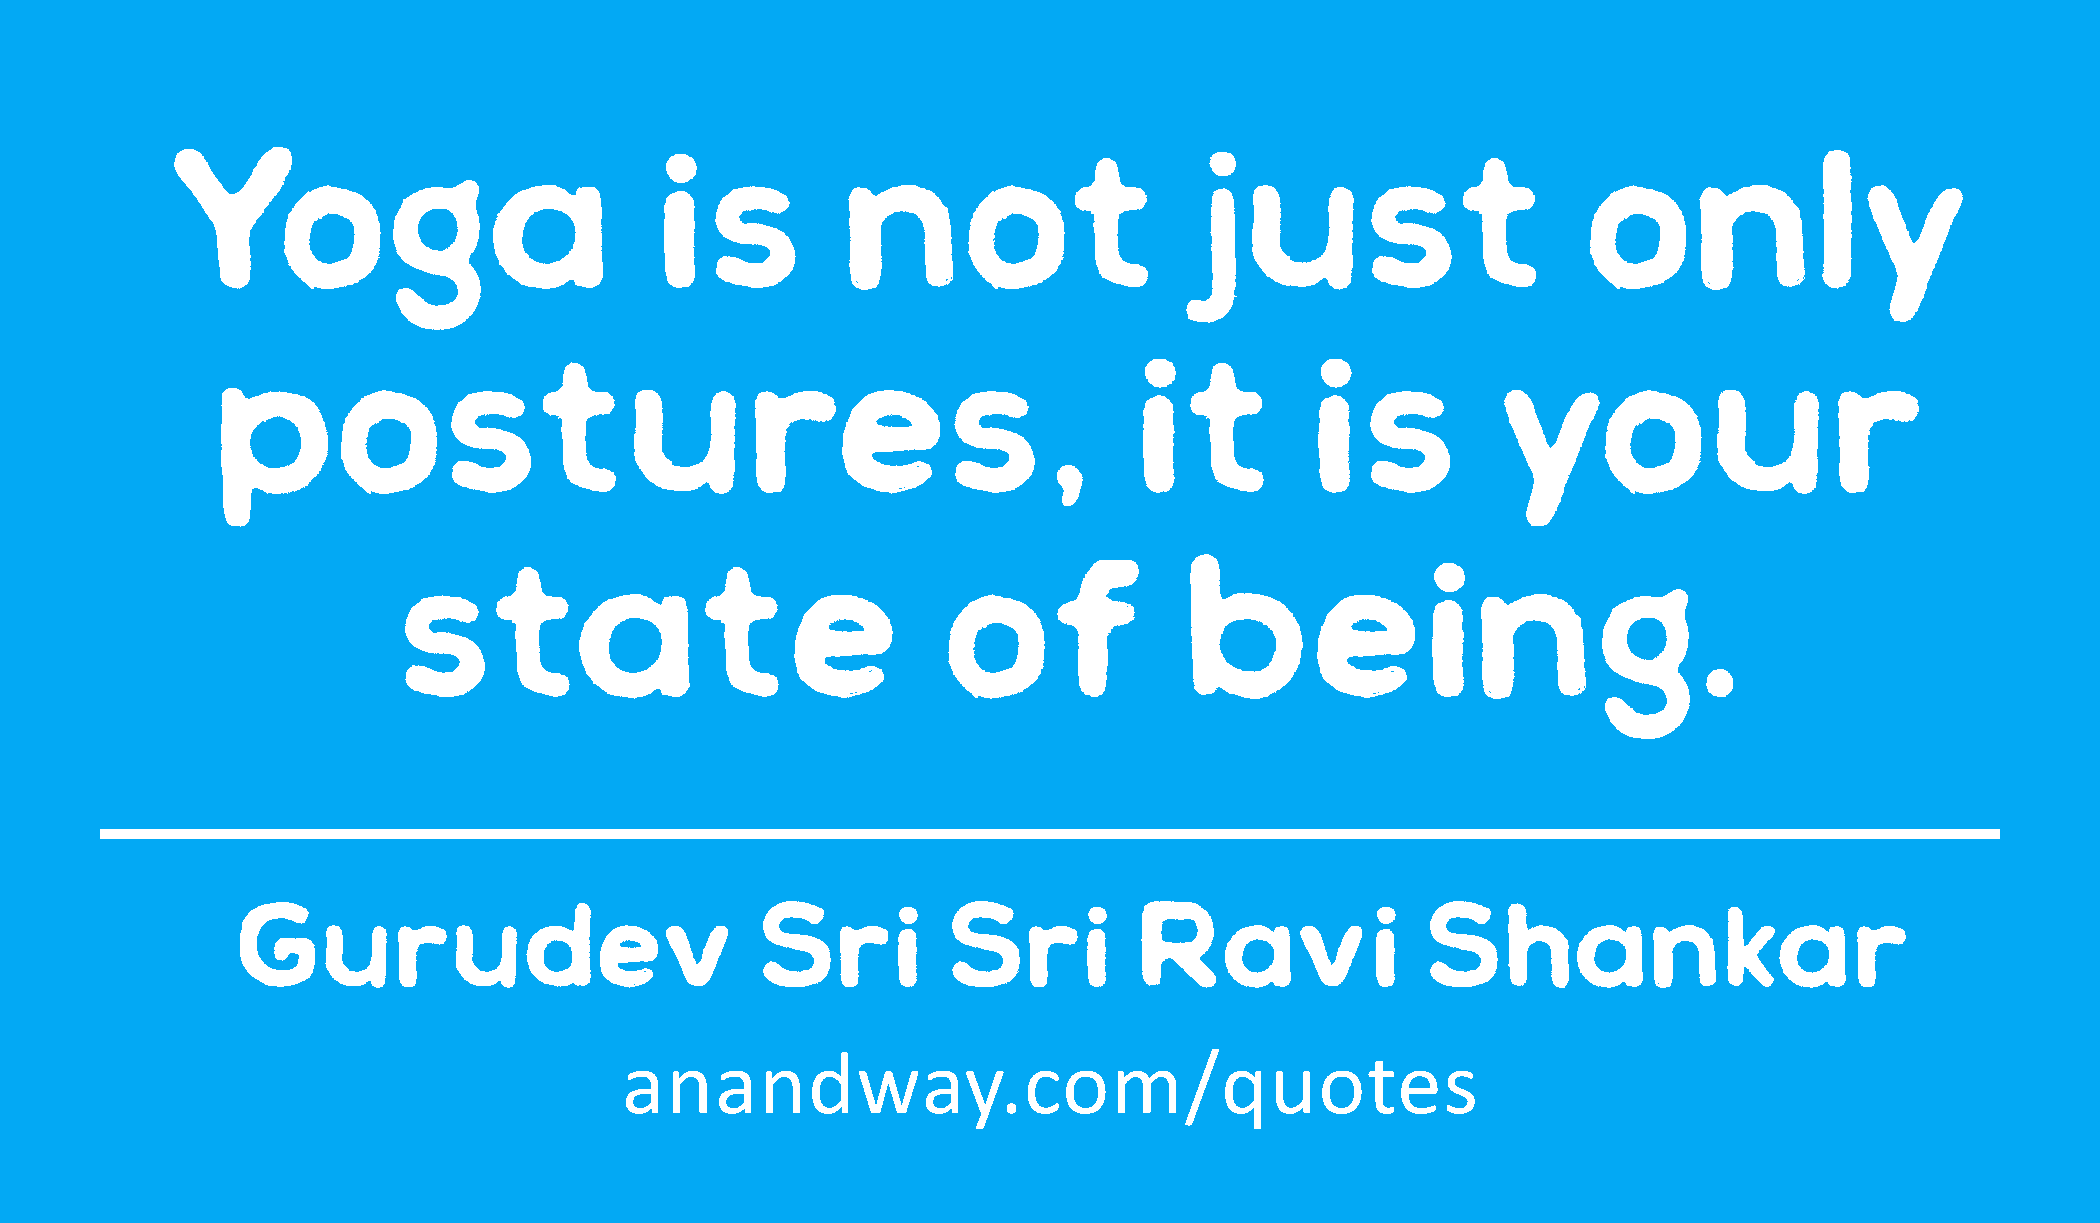 Yoga is not just only postures, it is your state of being. 
 -Gurudev Sri Sri Ravi Shankar